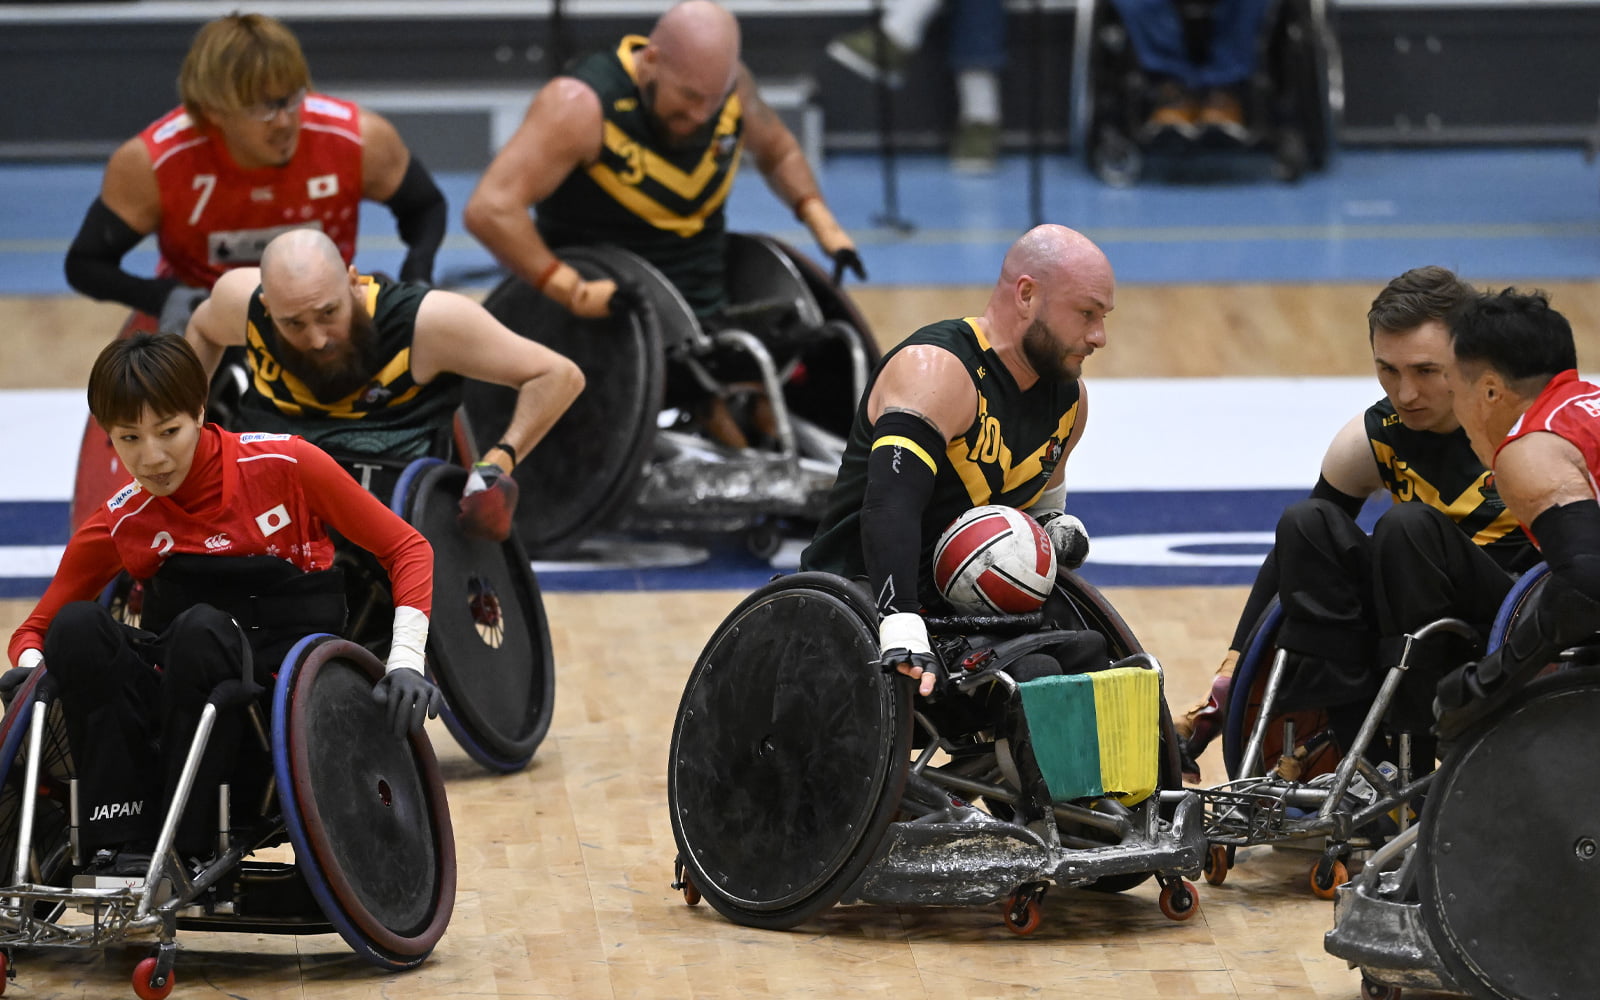 No More Second Chances For Second Placed Steelers At World Wheelchair Rugby Championship